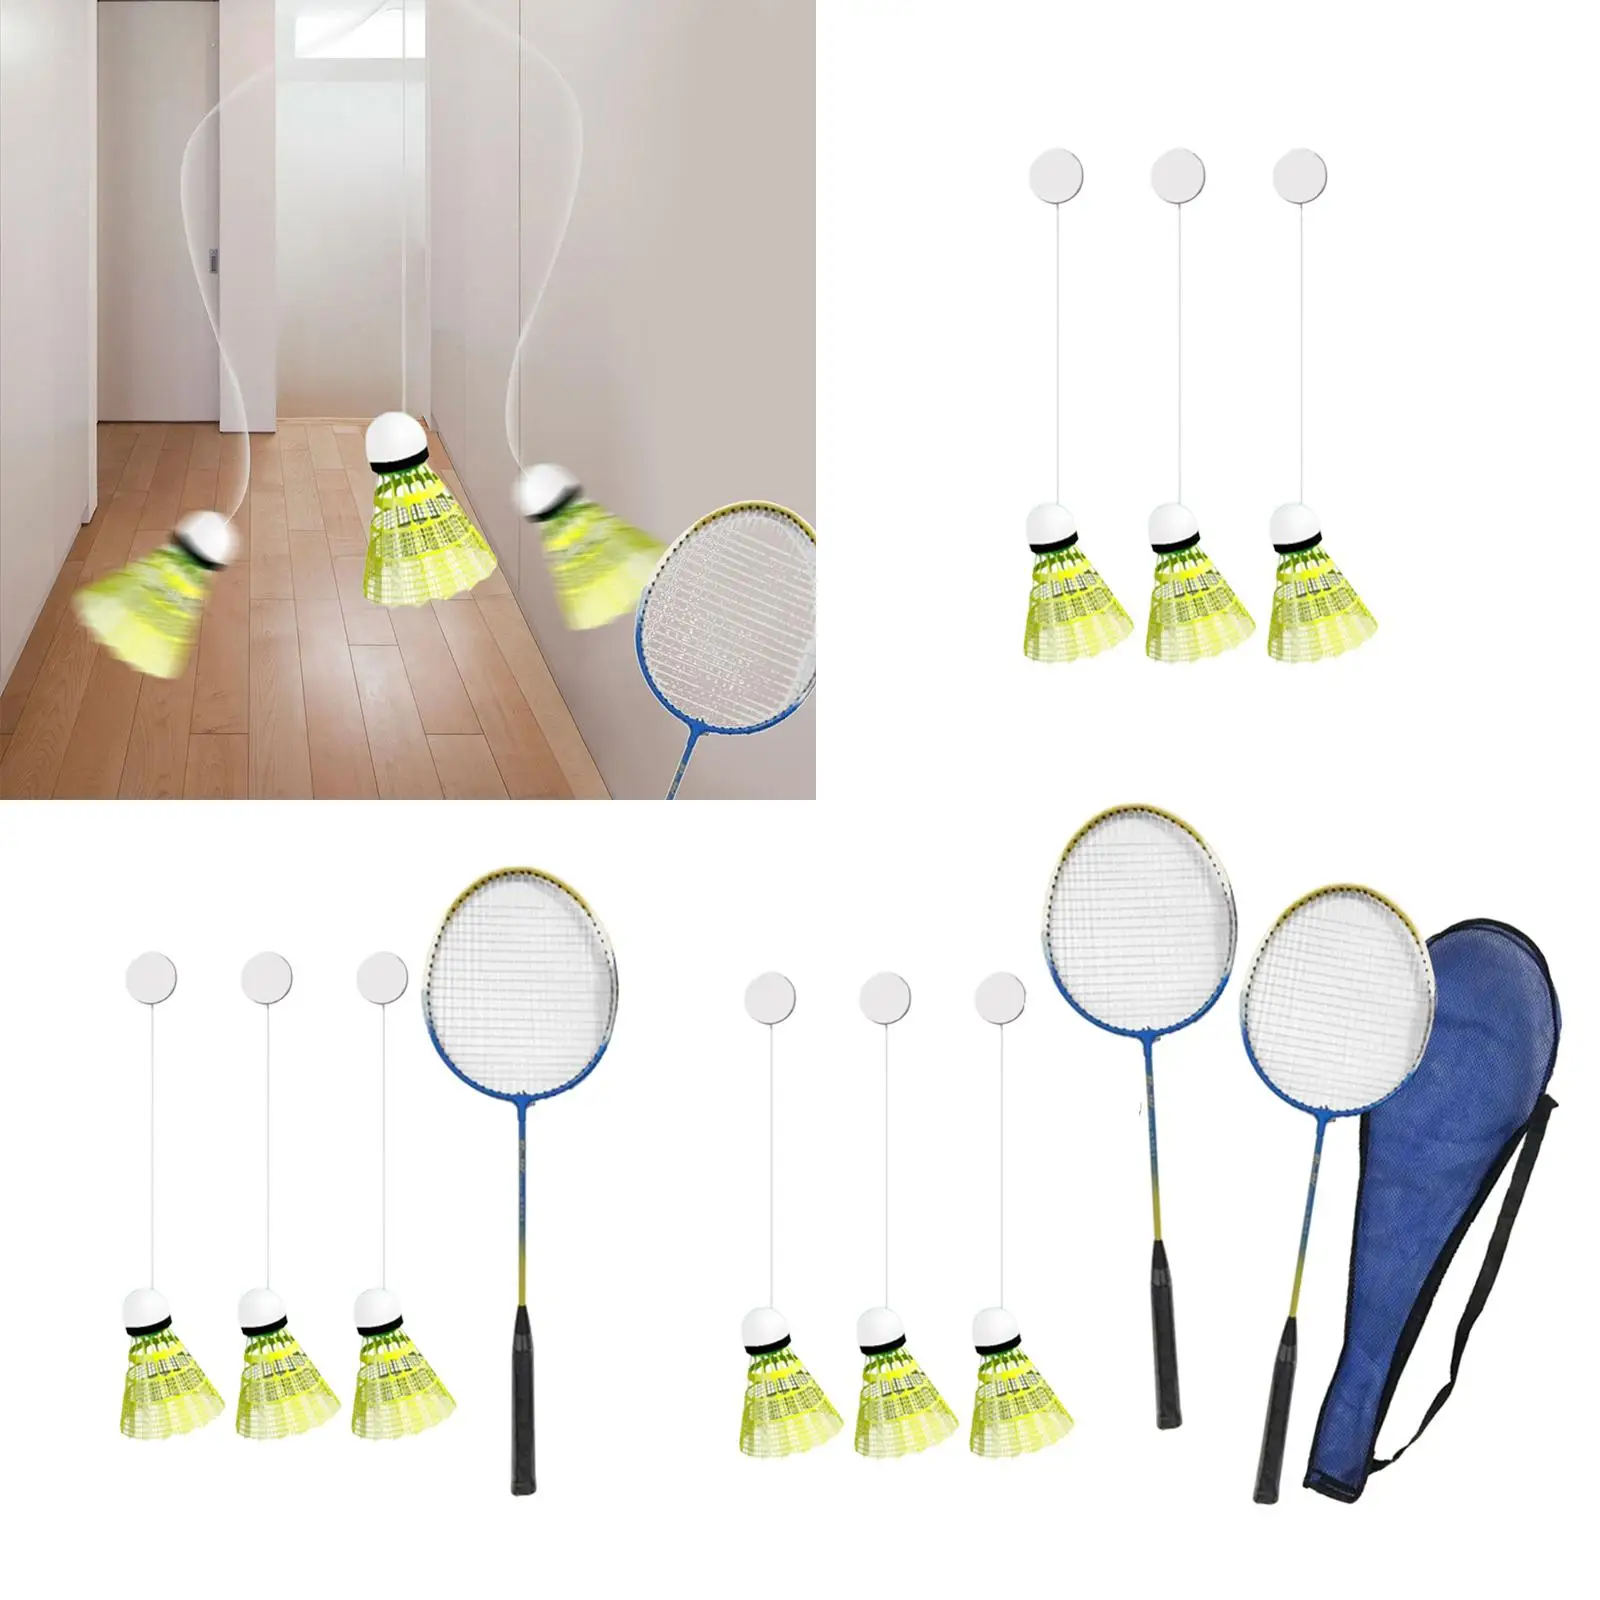 Badminton Solo Trainer, Badminton Training Device Children Aid Tool Portable Adjustable Single Player Practice for Games Home